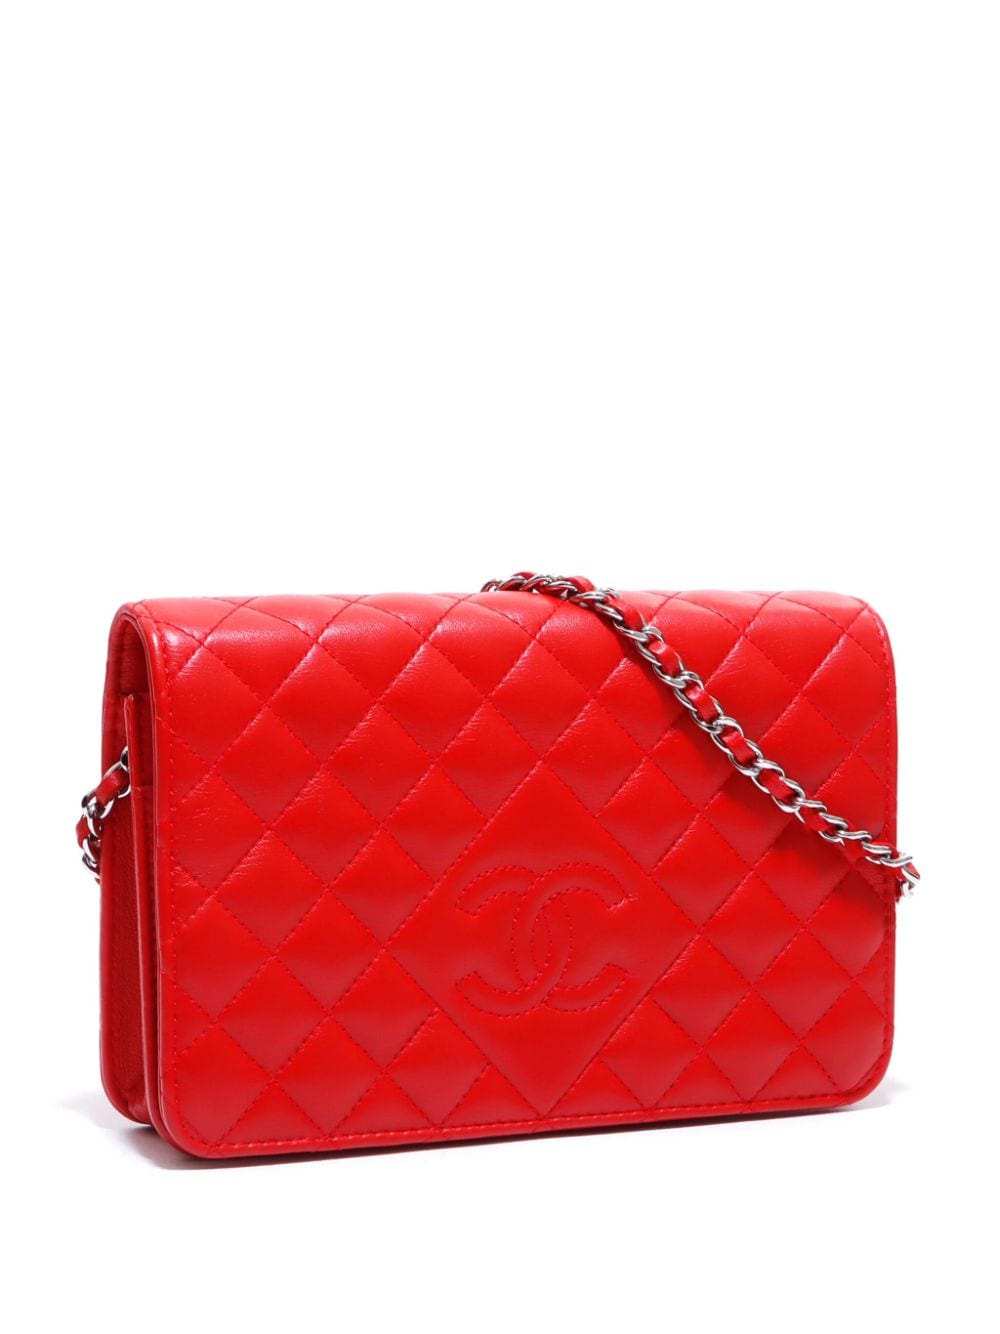 Pre-owned Chanel Cc 搭链钱包（2005-2006年典藏款） In Red